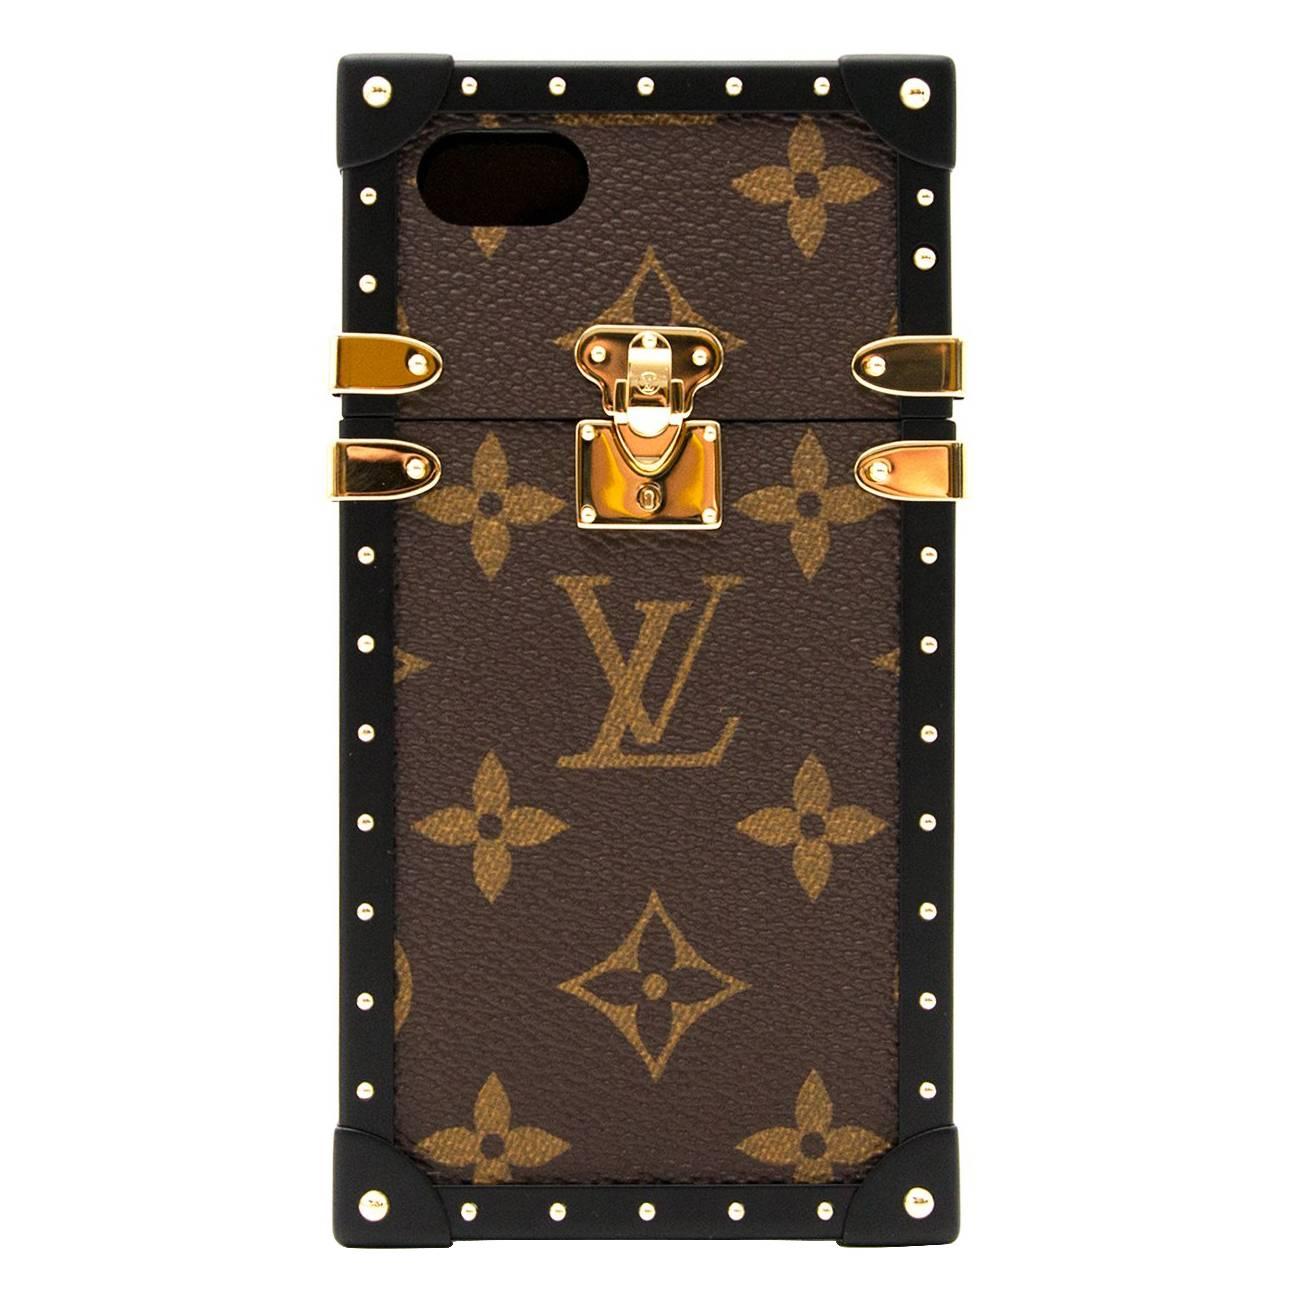 Brand New Very RARE Louis Vuitton Petite Malle-Inspired iPhone 7 Case